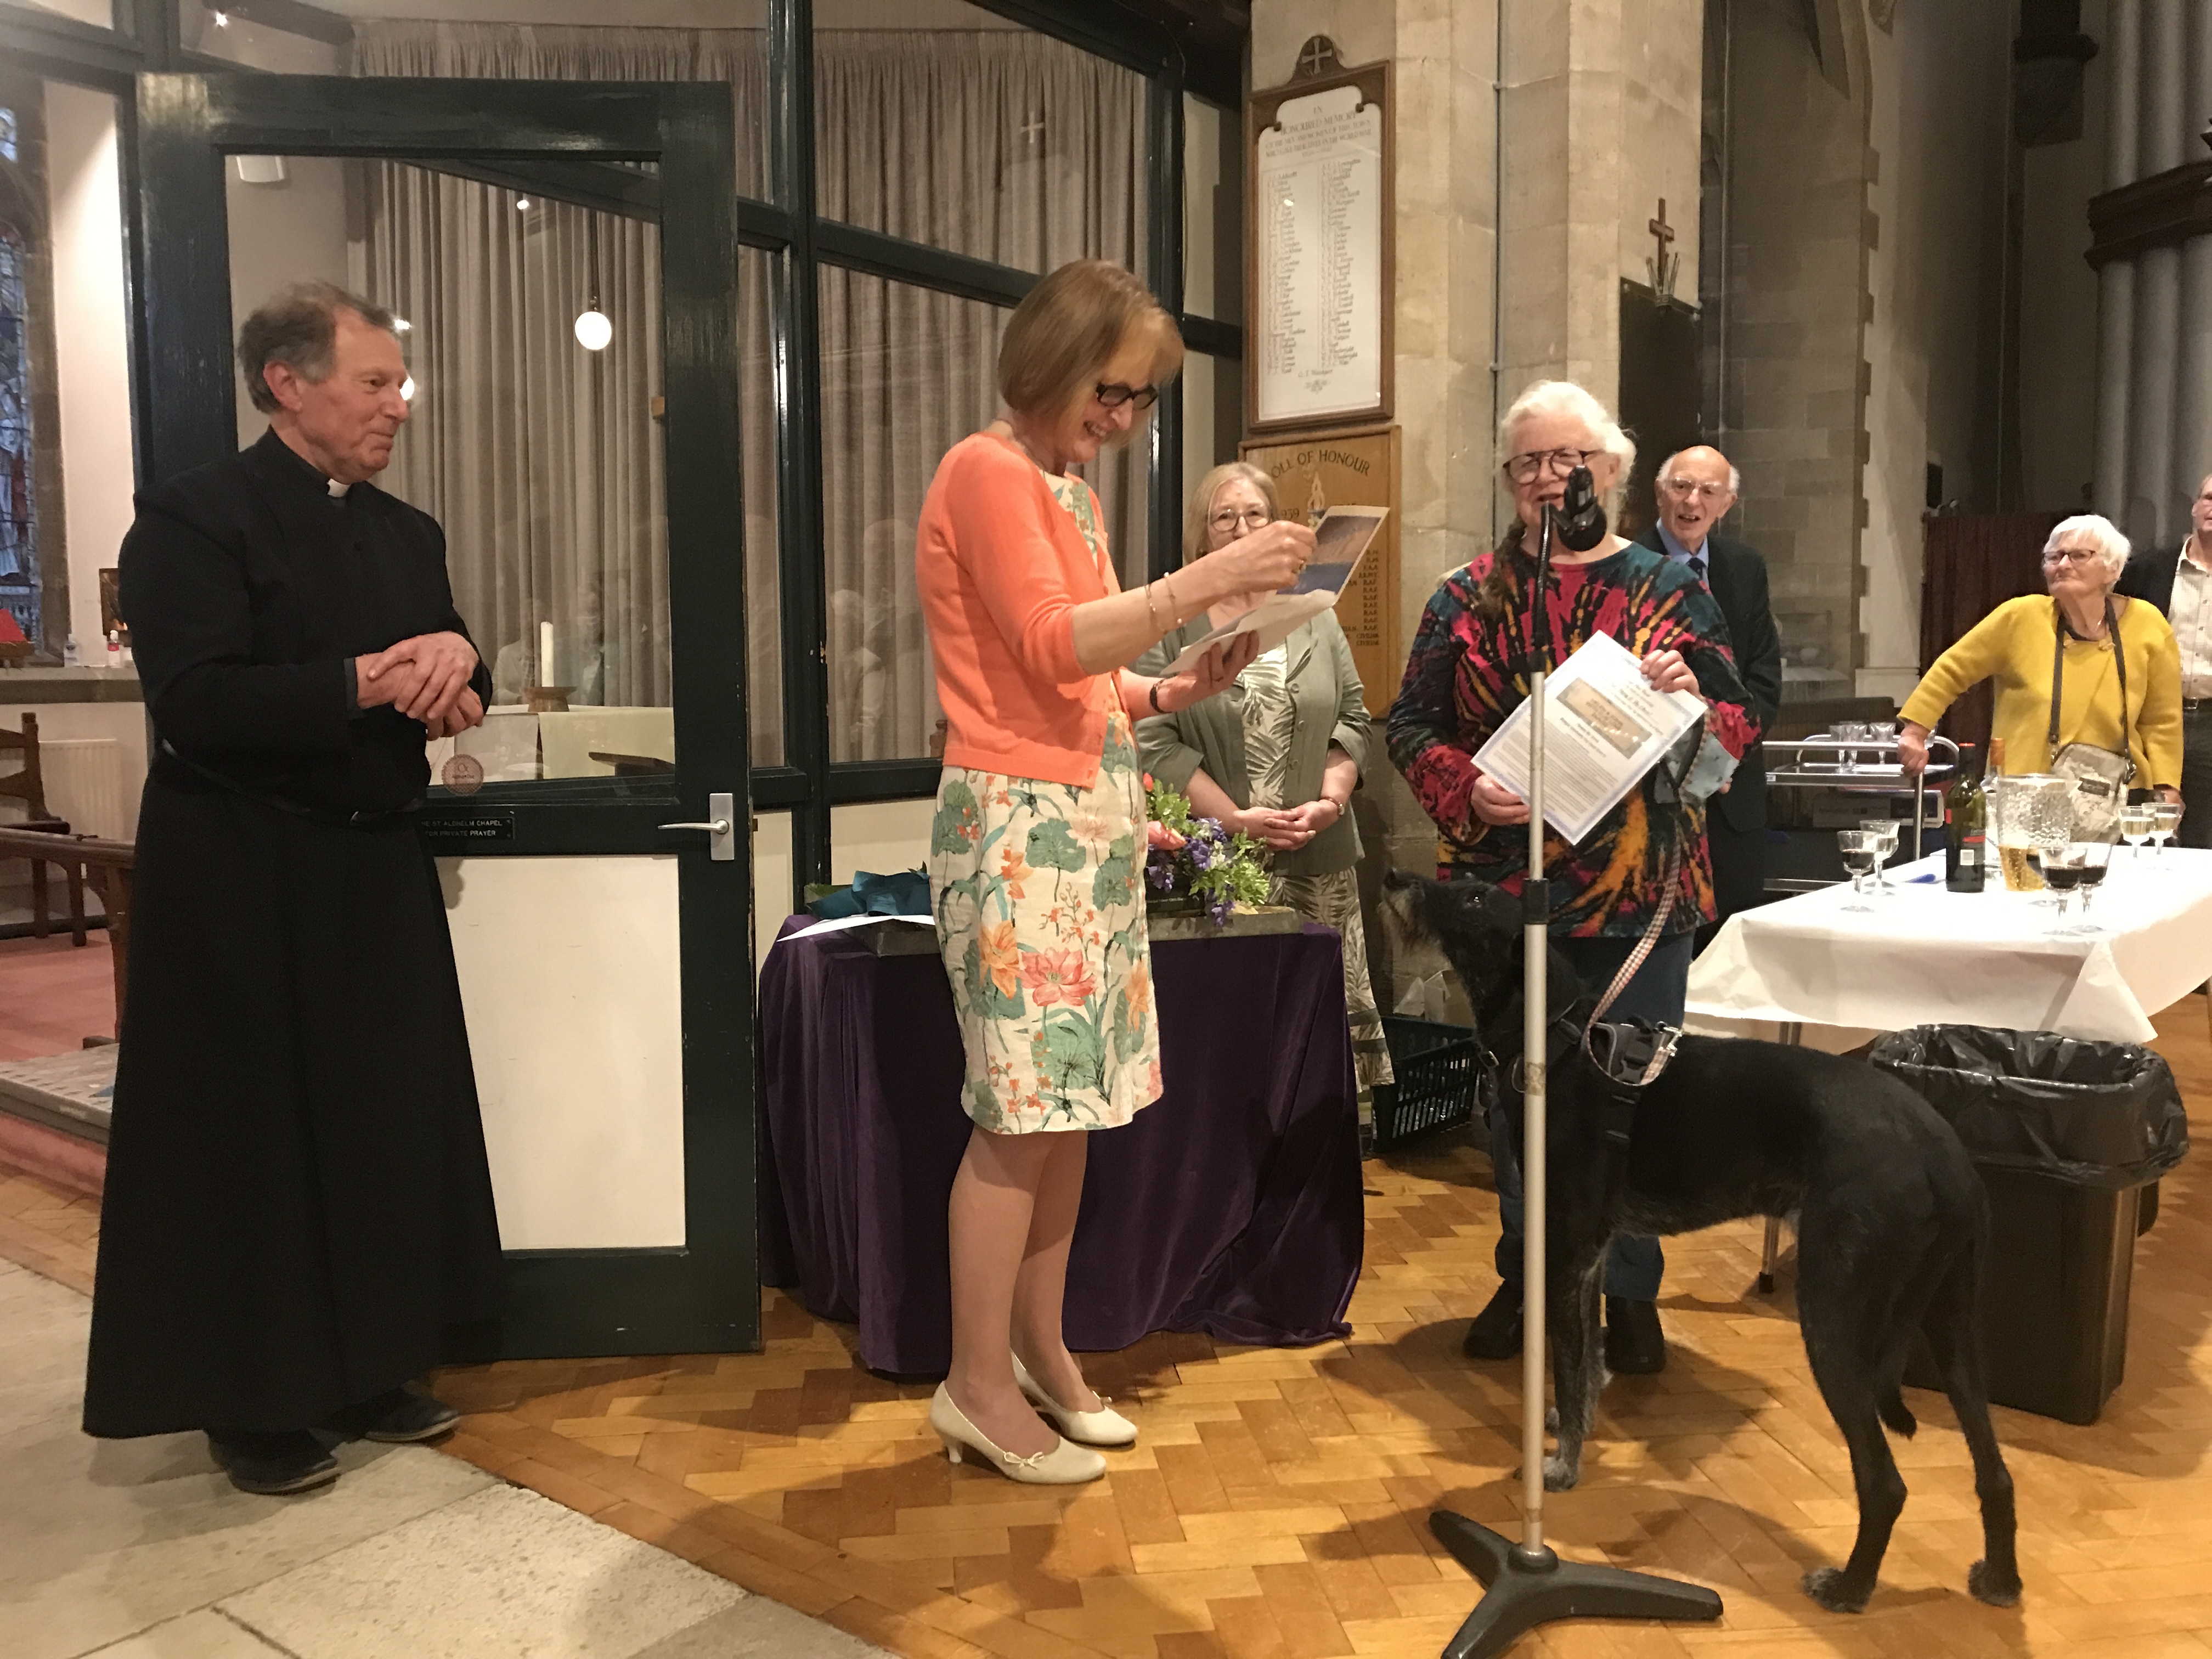 The choir have arranged for John and Helen is be forever on the pier in Swanage!  Harry was in on the scene too as Diana made the presentation.  A celebratory plaque is to appear in a few weeks!  What a lovely present!